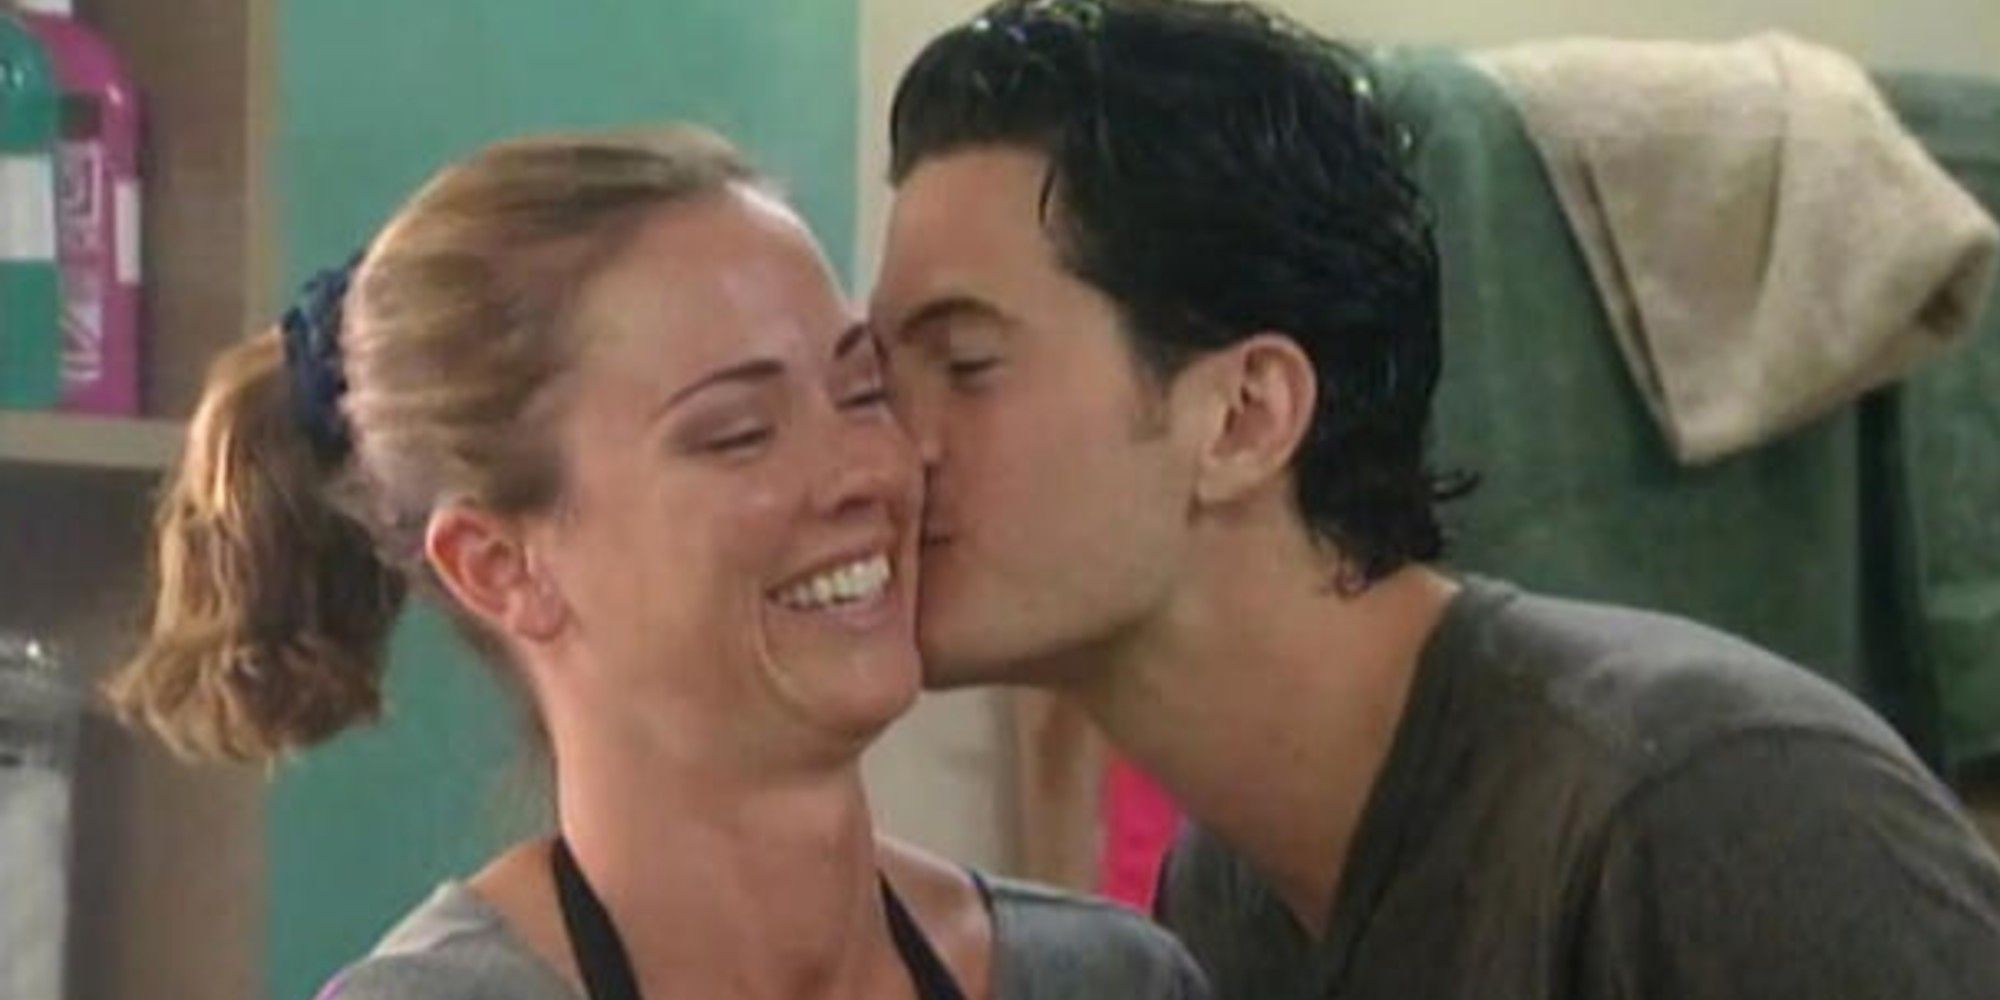 Dr. Will kissing Shannon on the cheek from Big Brother.